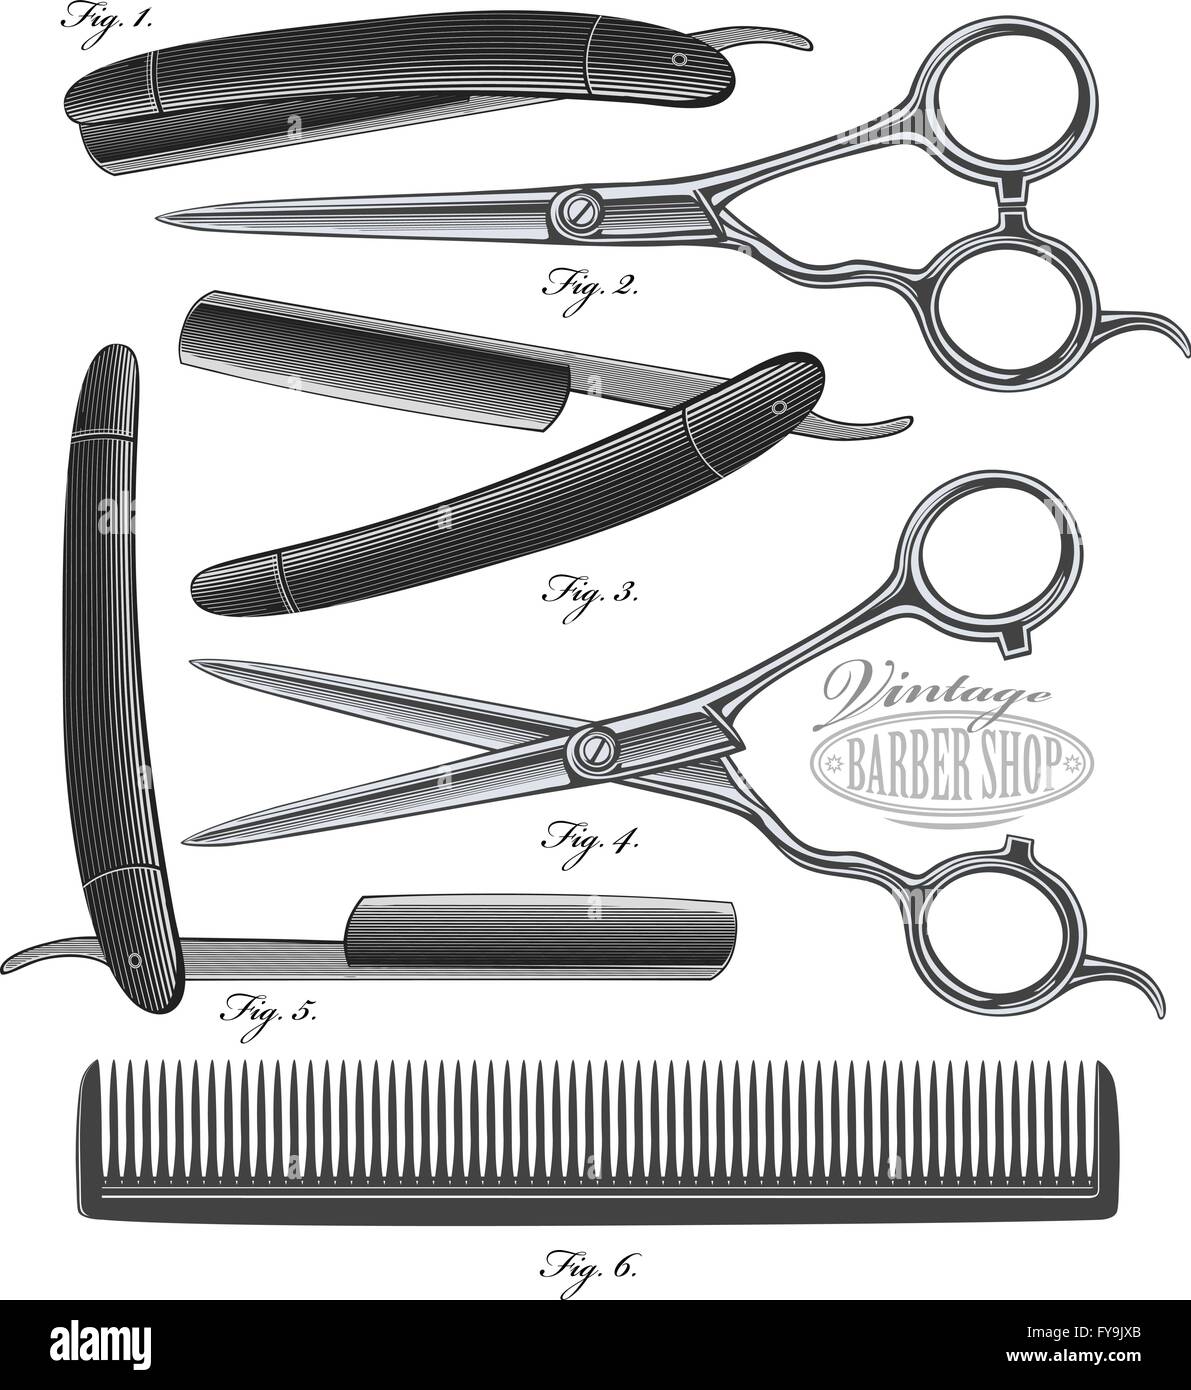 Scissors and hair comb vintage round badge Vector Image